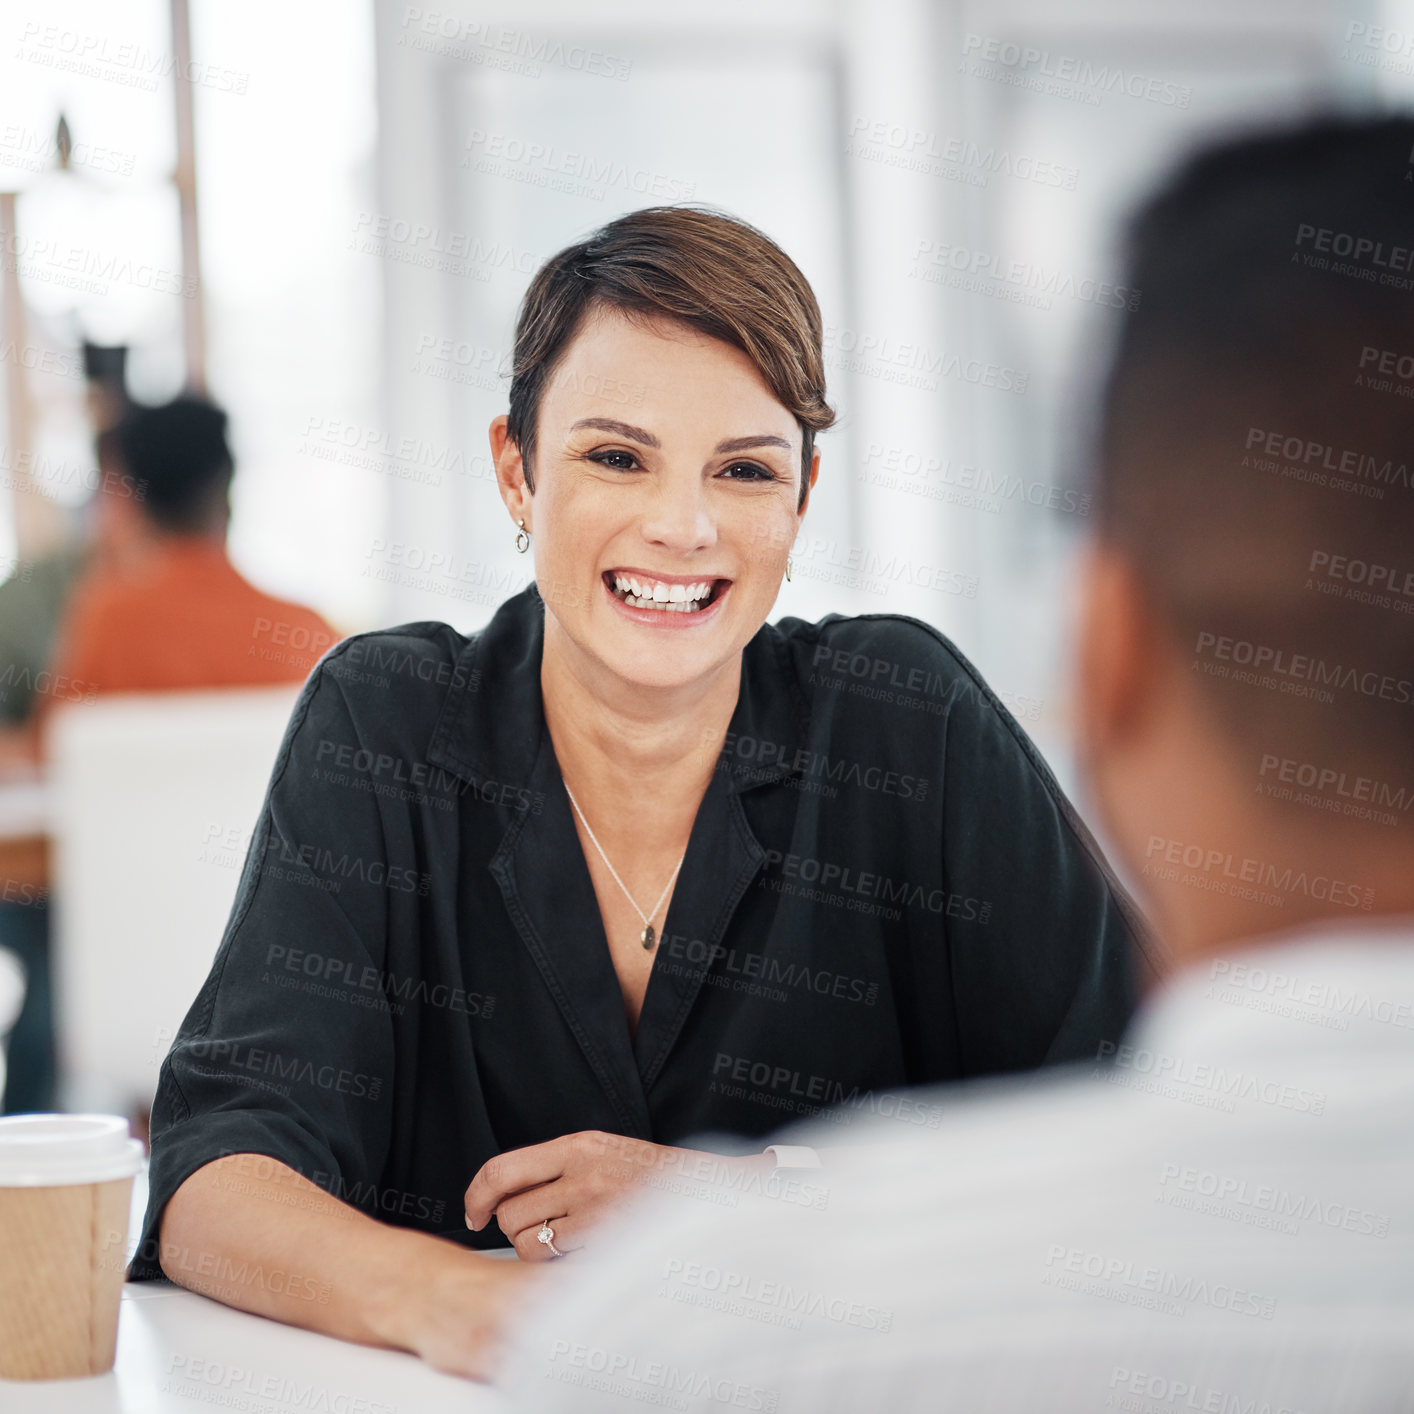 Buy stock photo Cropped shot of an attractive young businesswoman sitting and having a discussion with a colleague in the office